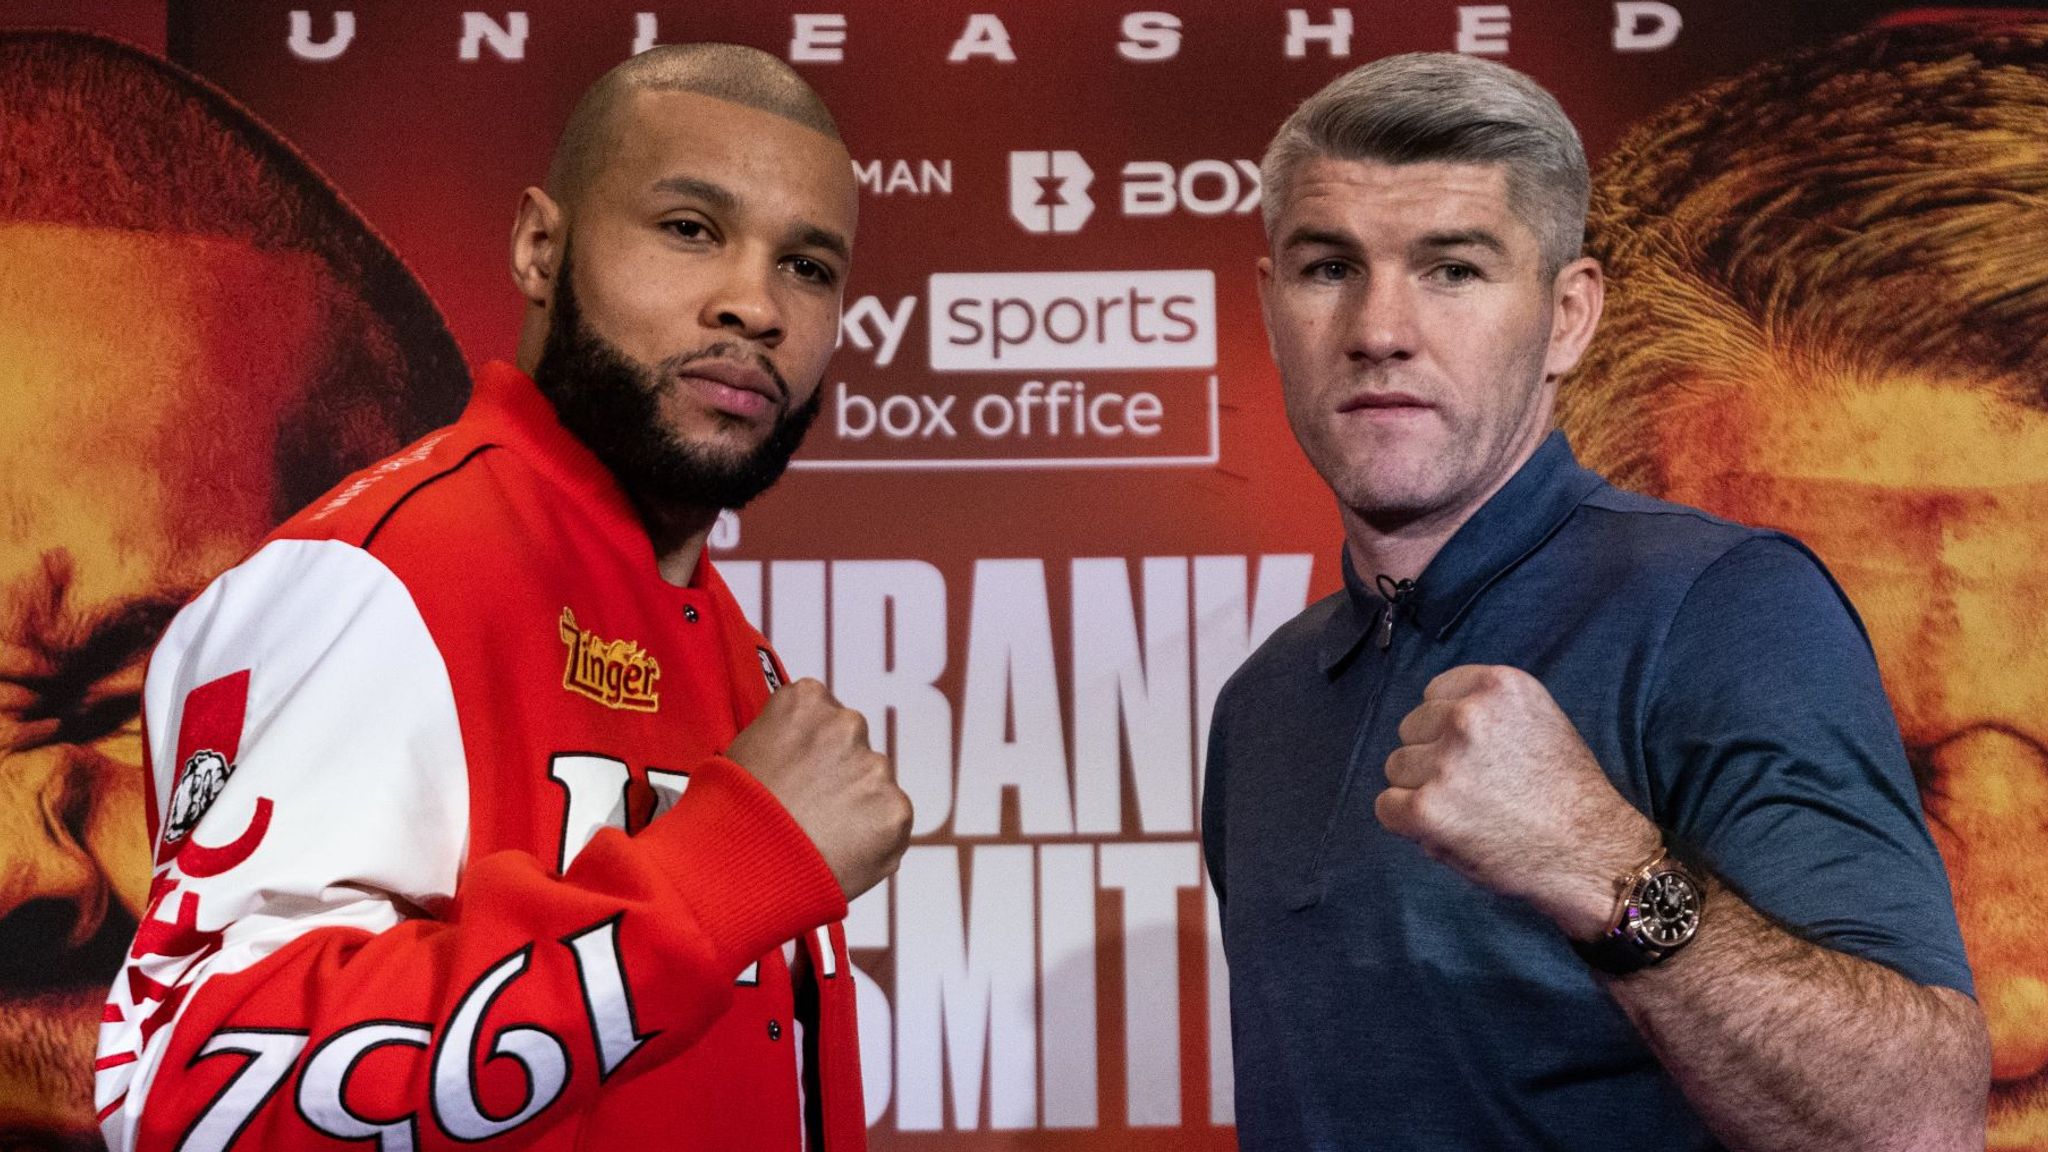 Chris Eubank Jr has made career off his name says Liam Smith ahead of Manchester clash Boxing News Sky Sports